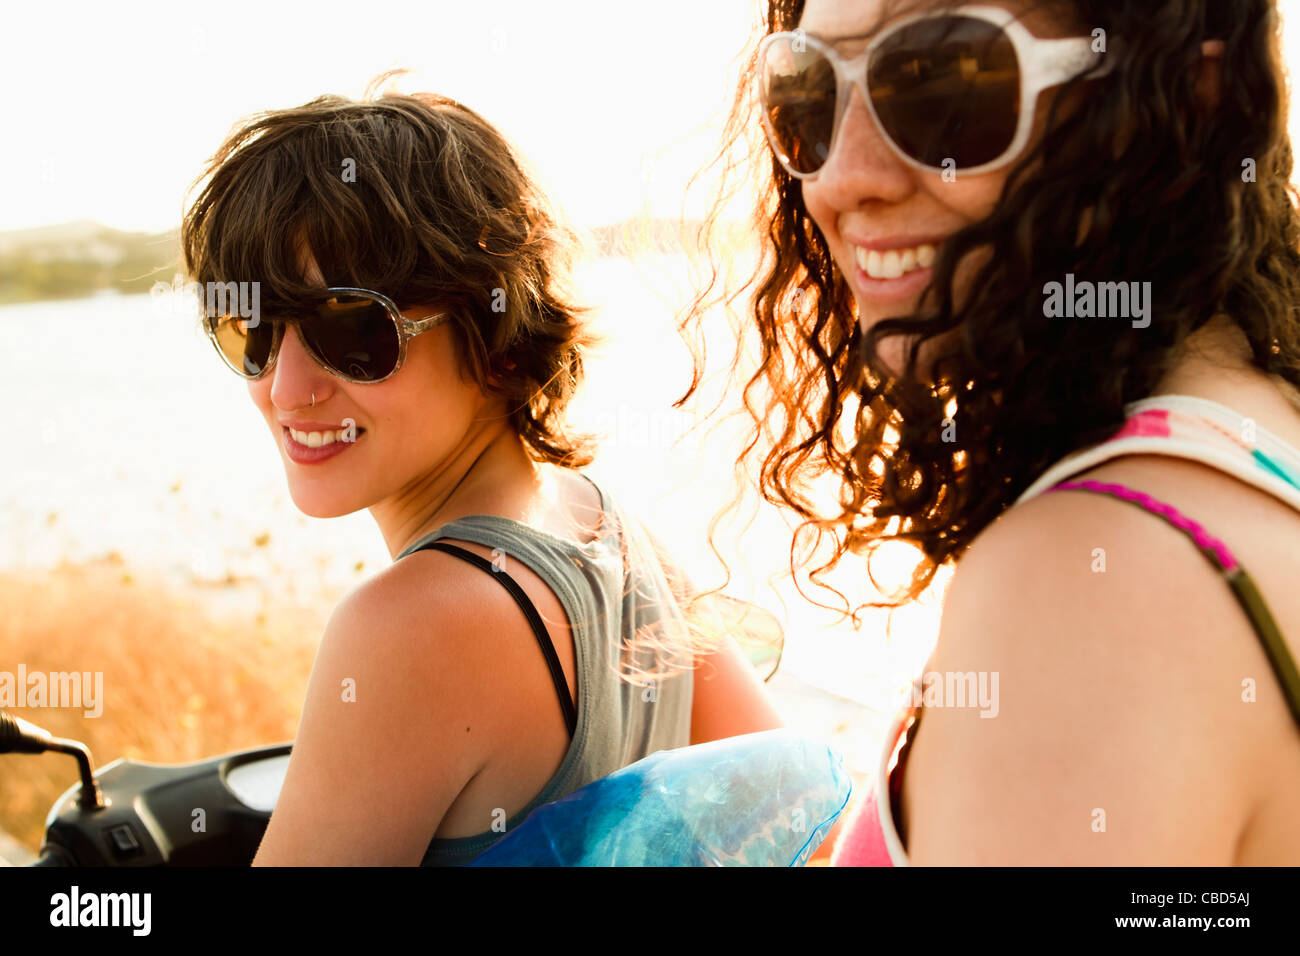 Smiling women riding scooter on beach Stock Photo